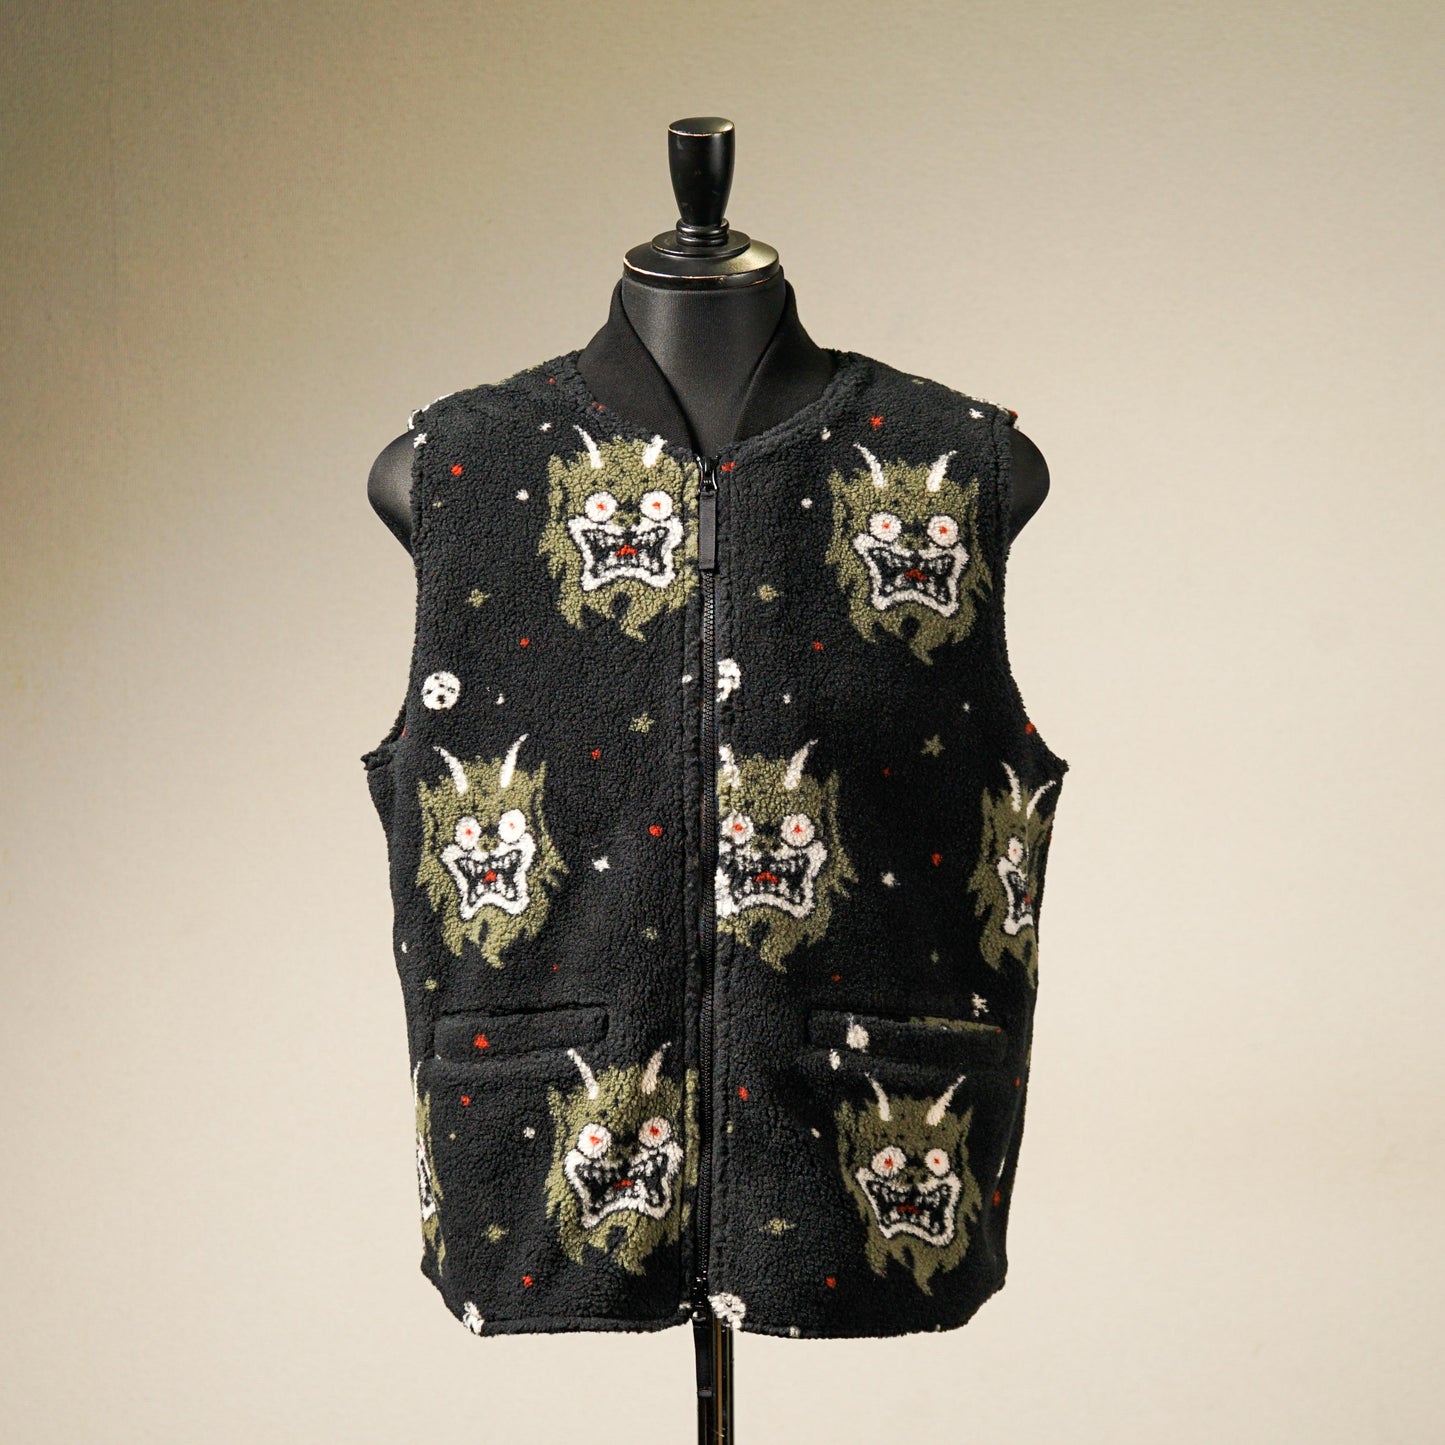 GREAT MOON MONSTER - VEST / WRD-22-AW-08